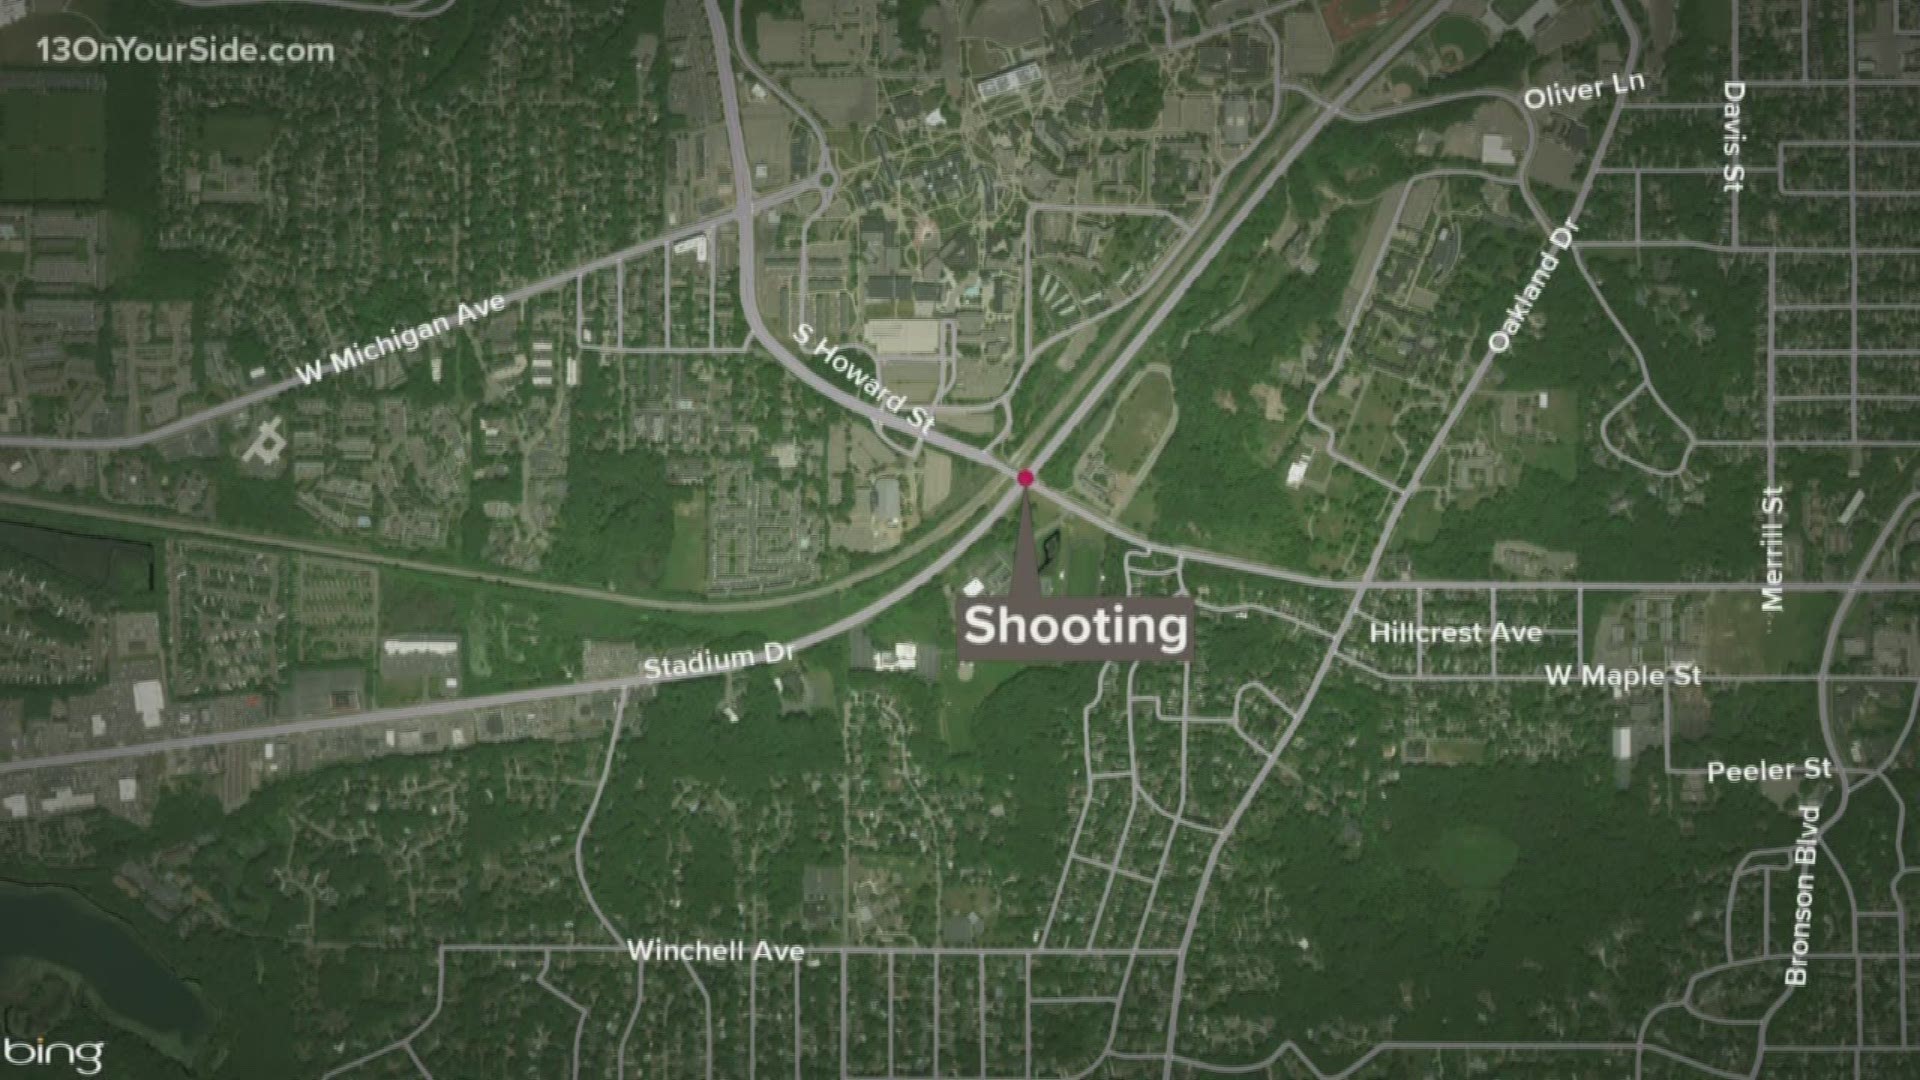 Authorities in Kalamazoo are investigating a shooting early Friday morning that left three people injured. Witnesses described the suspect vehicle as a yellow Chevy Camaro, possibly with black racing stripes. It left the area immediately after the shooting.